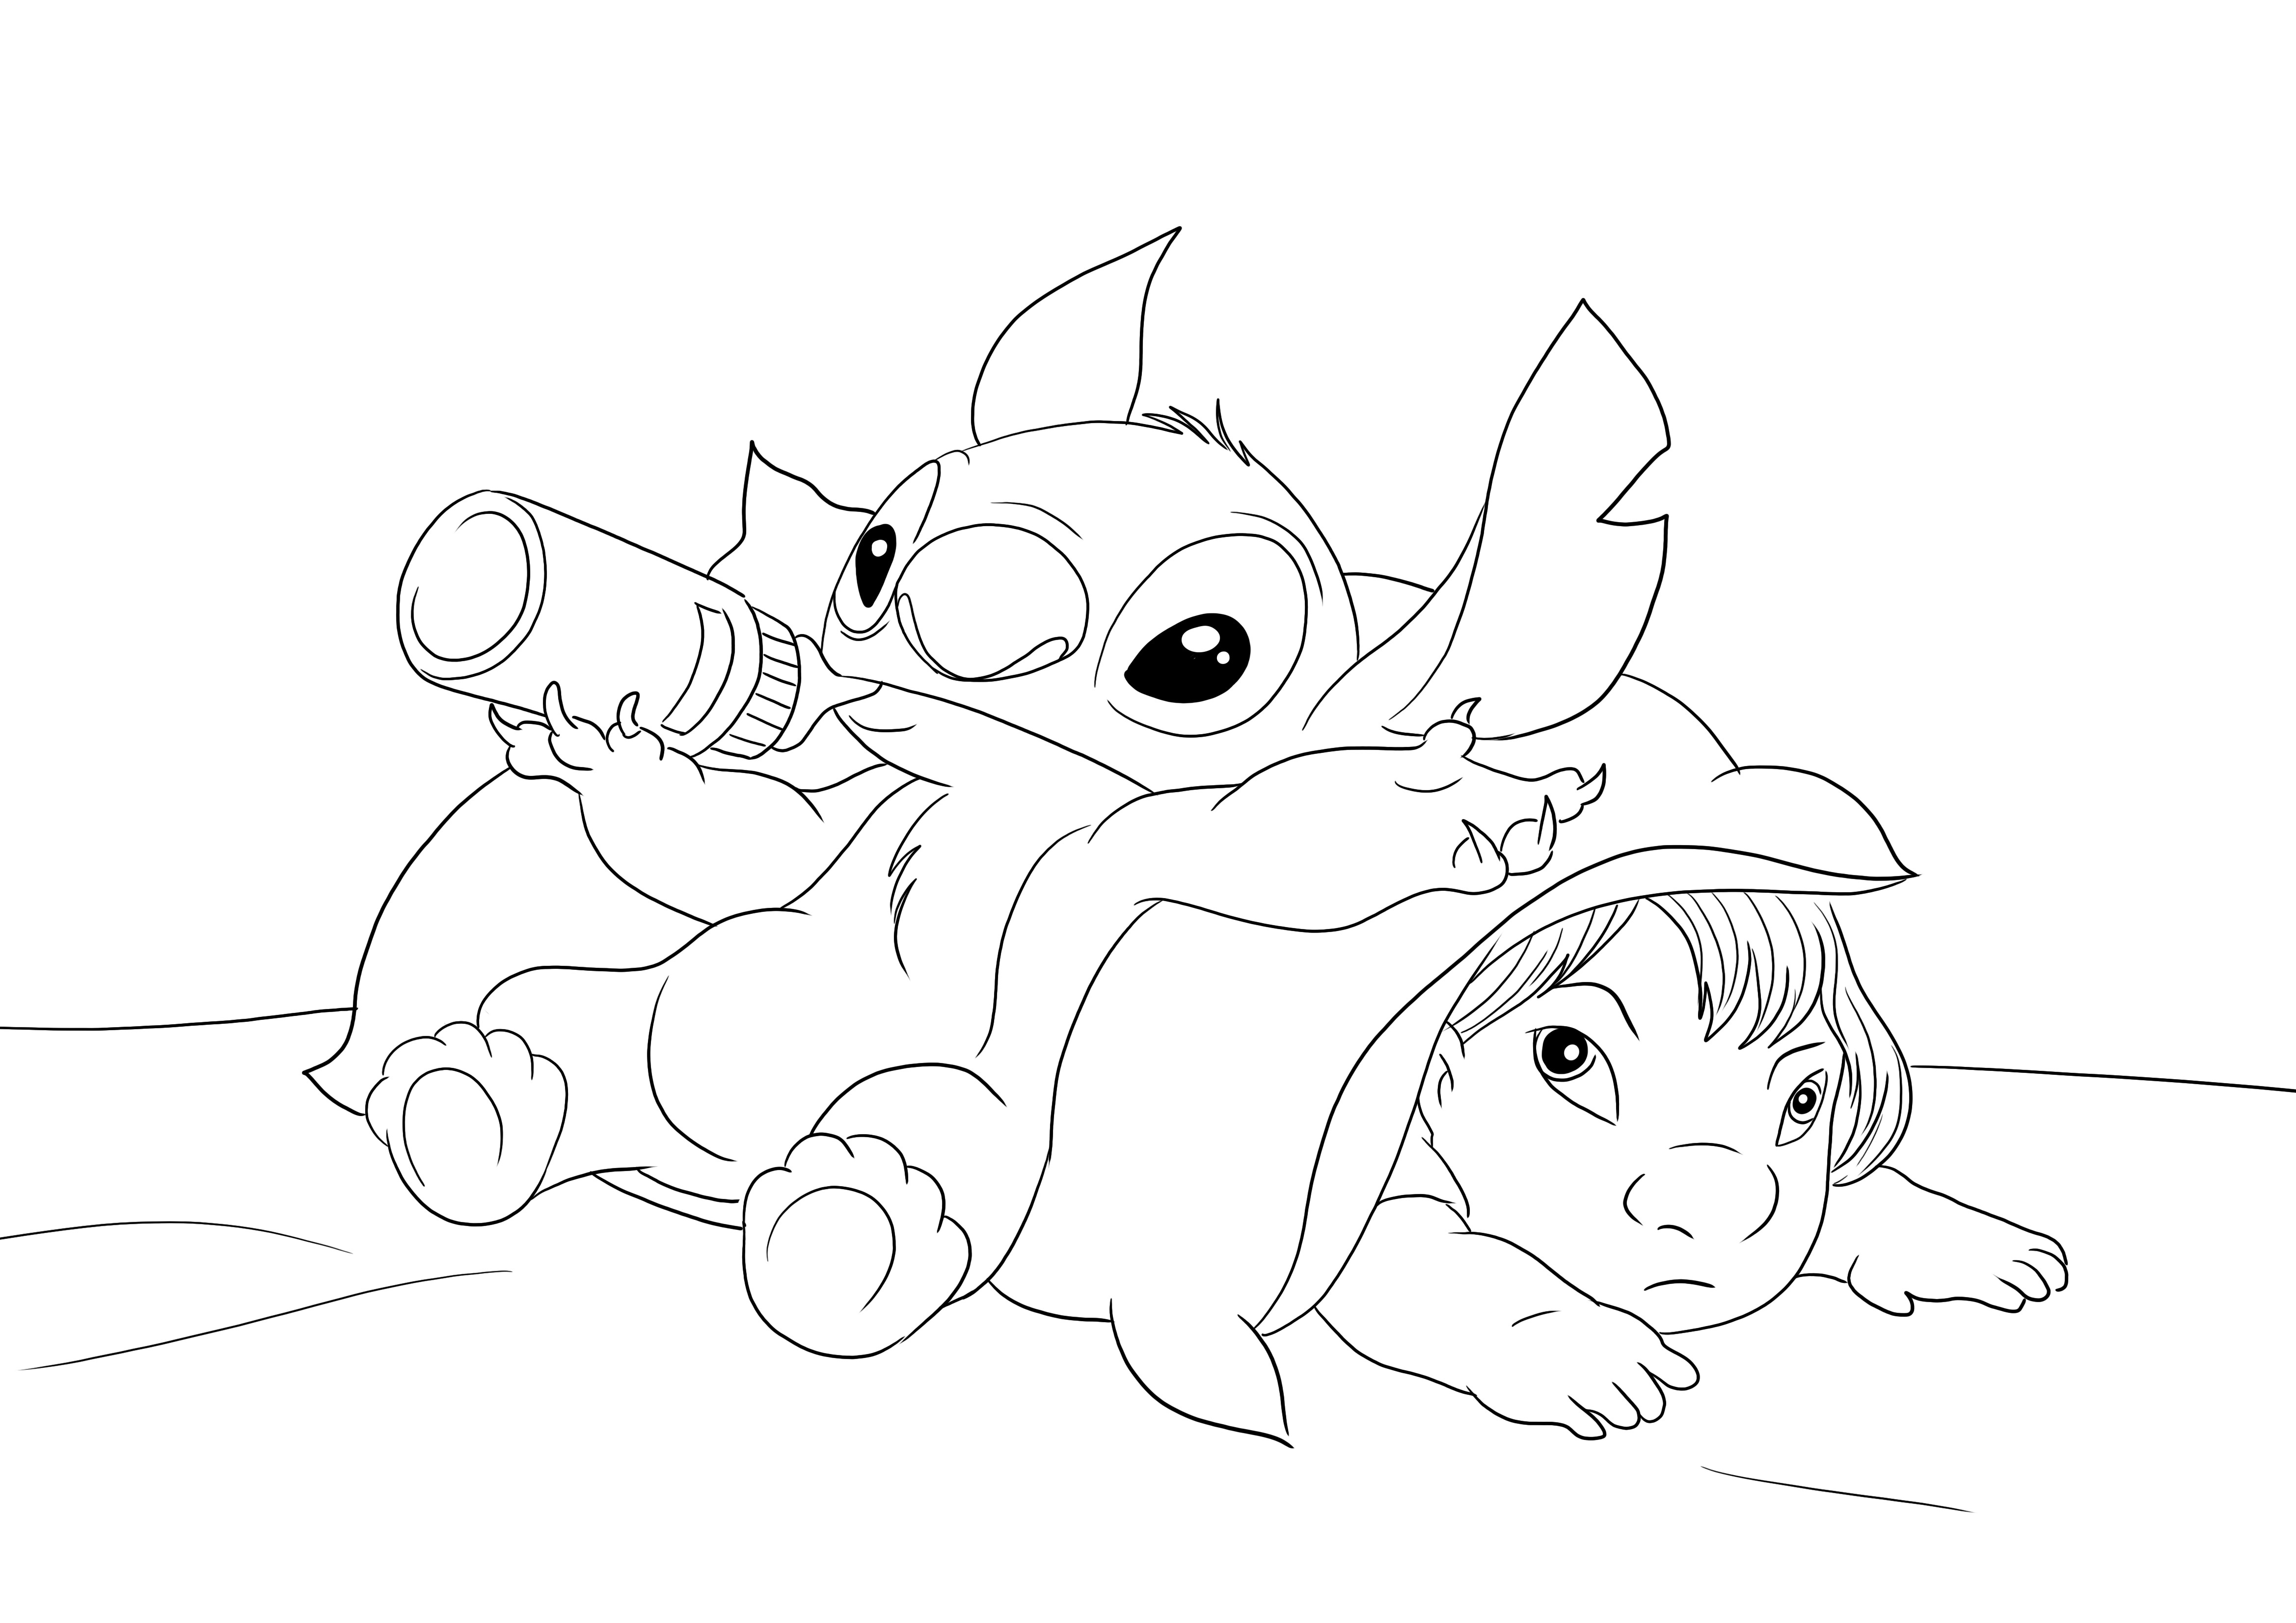 Baby Stitch and Lilo to download for free and color for kids